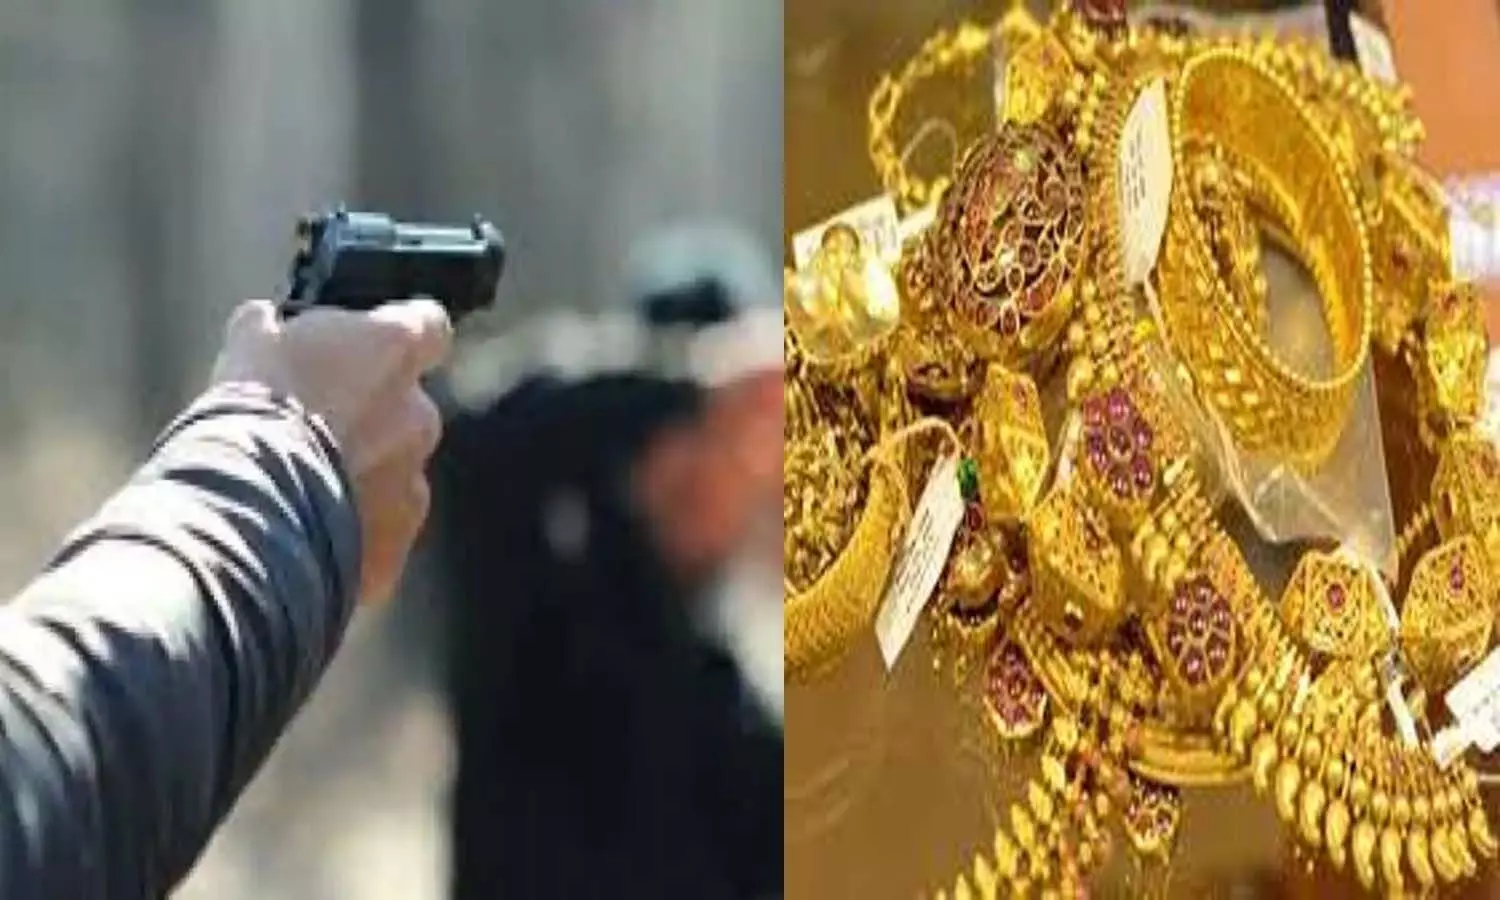 Miscreants looted 6 gold chains worth Rs 3.5 lakh by firing in bullion market in Agra, shot and injured many people